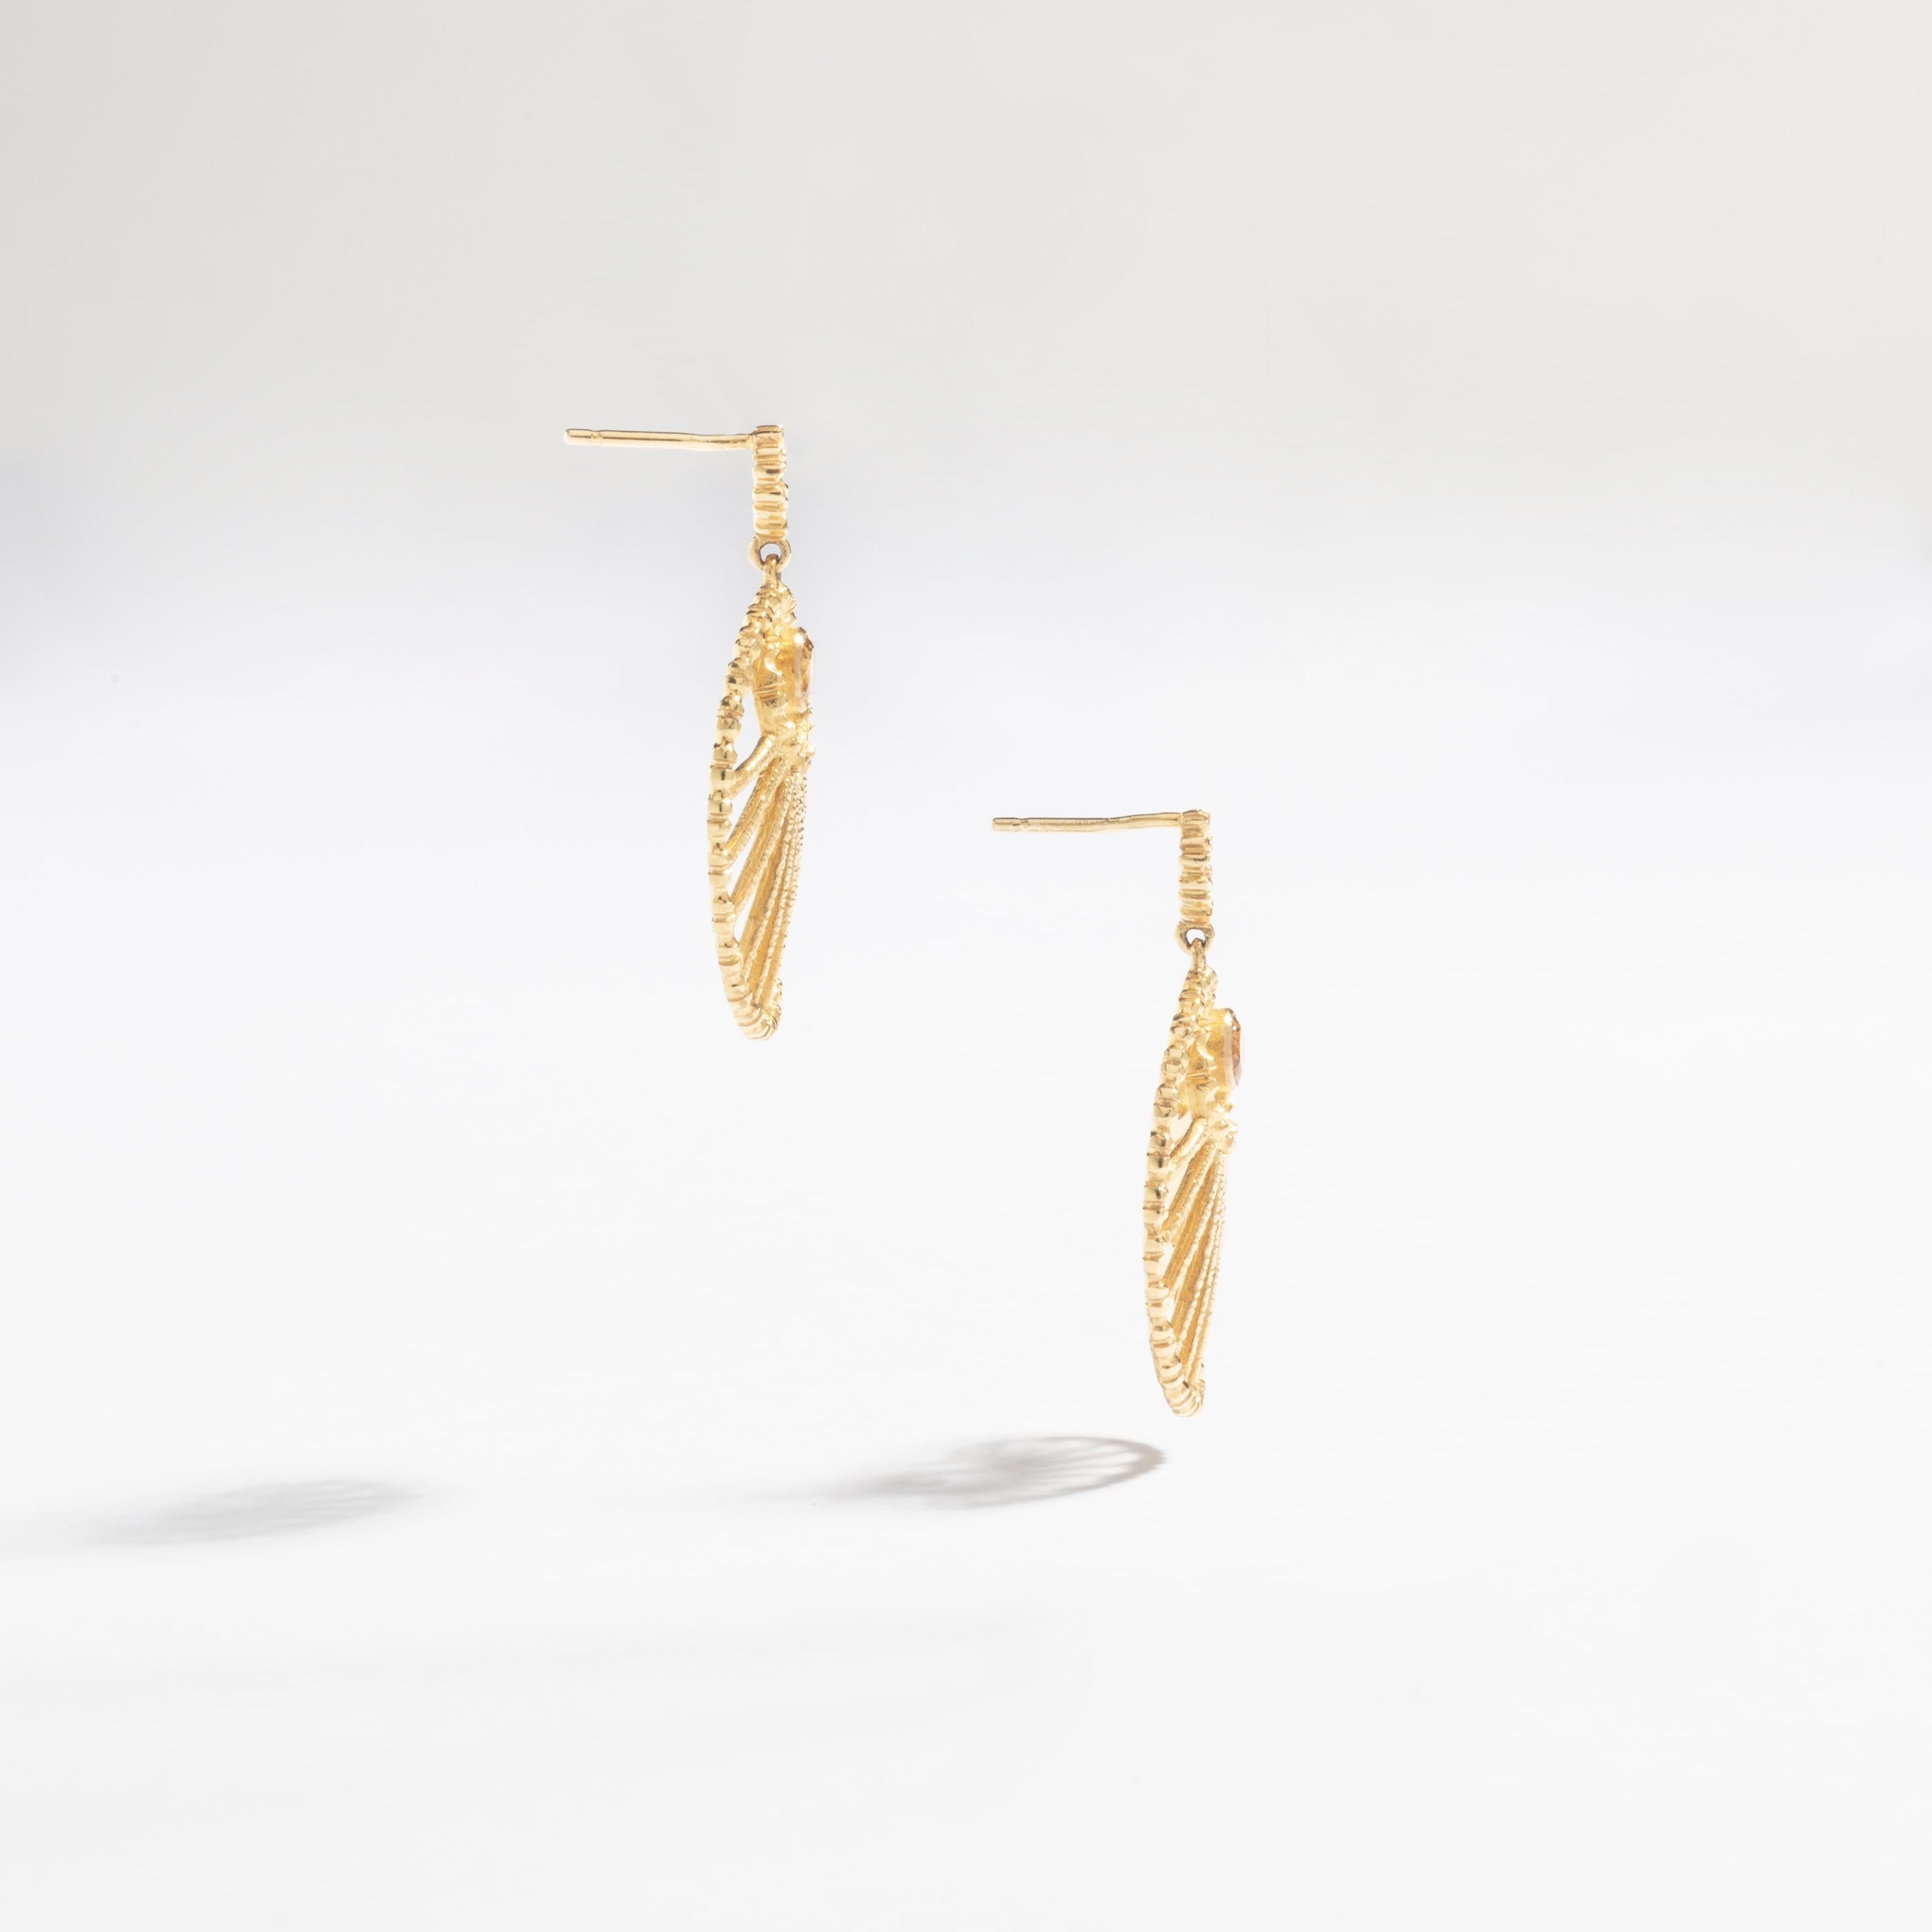 Lalaounis yellow gold 18K Earrings each one centered by a yellow stone round cut. 
Lalaounis maker's marks.
